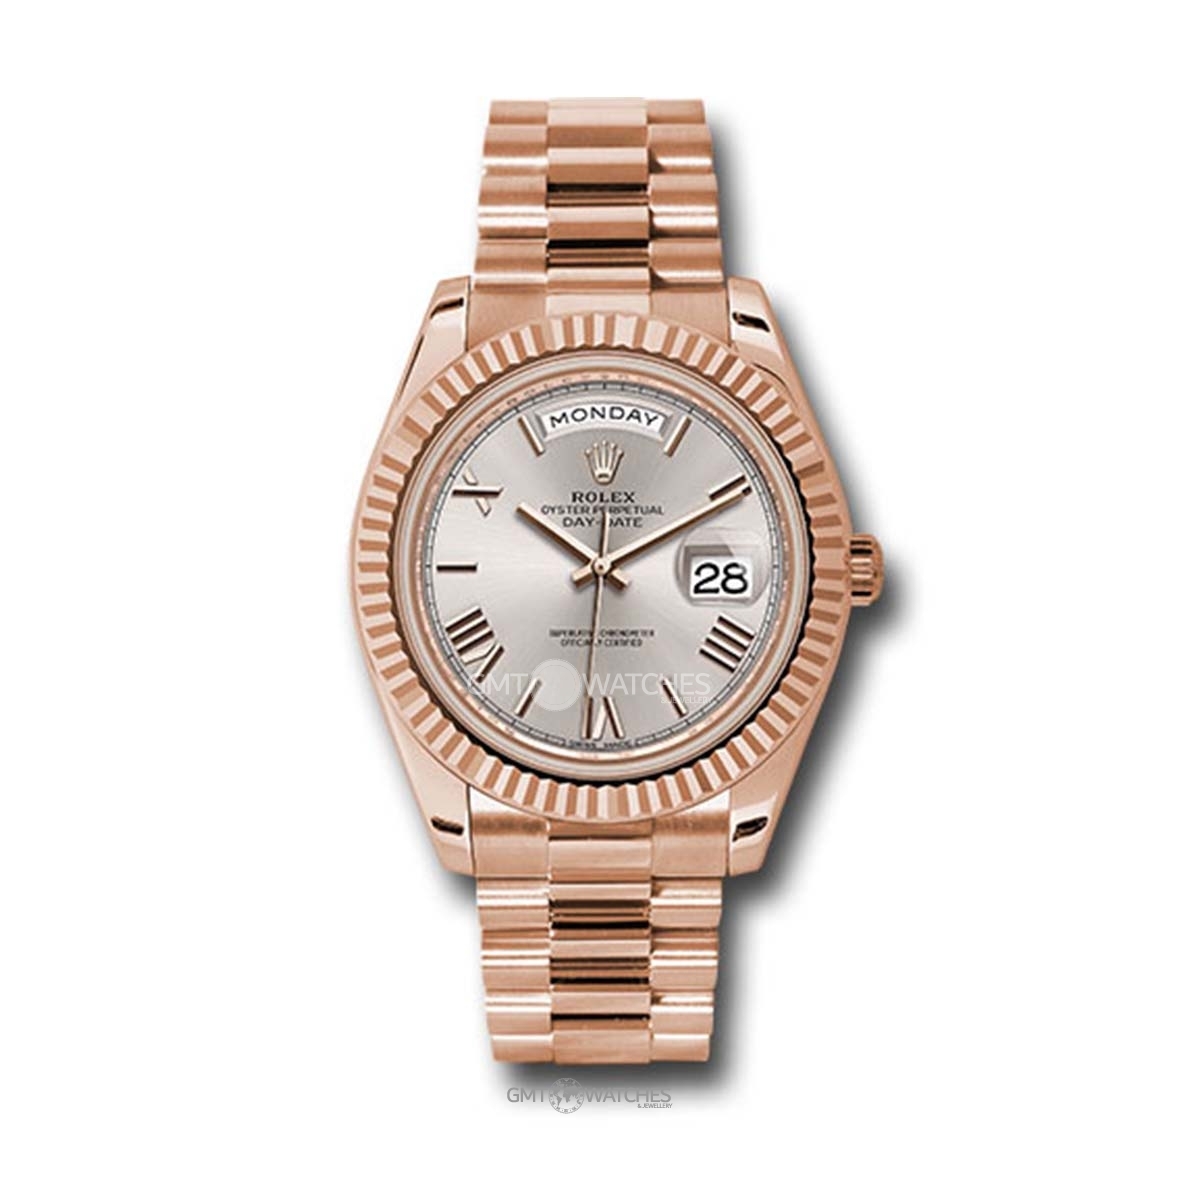 Rolex Oyster Perpetual Day-Date 40mm 18k Everose Gold 228235 sdrp